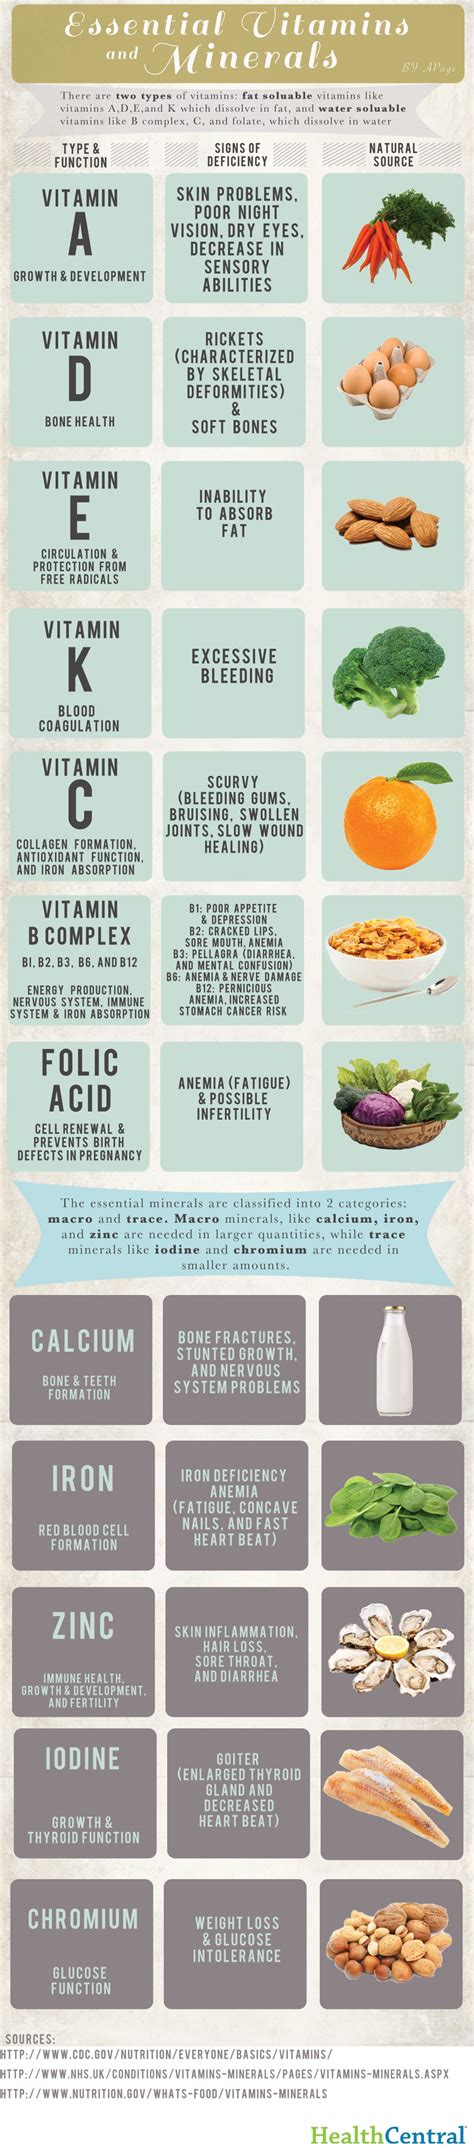 Essential Vitamins And Minerals Infographic Health Food Nutrition